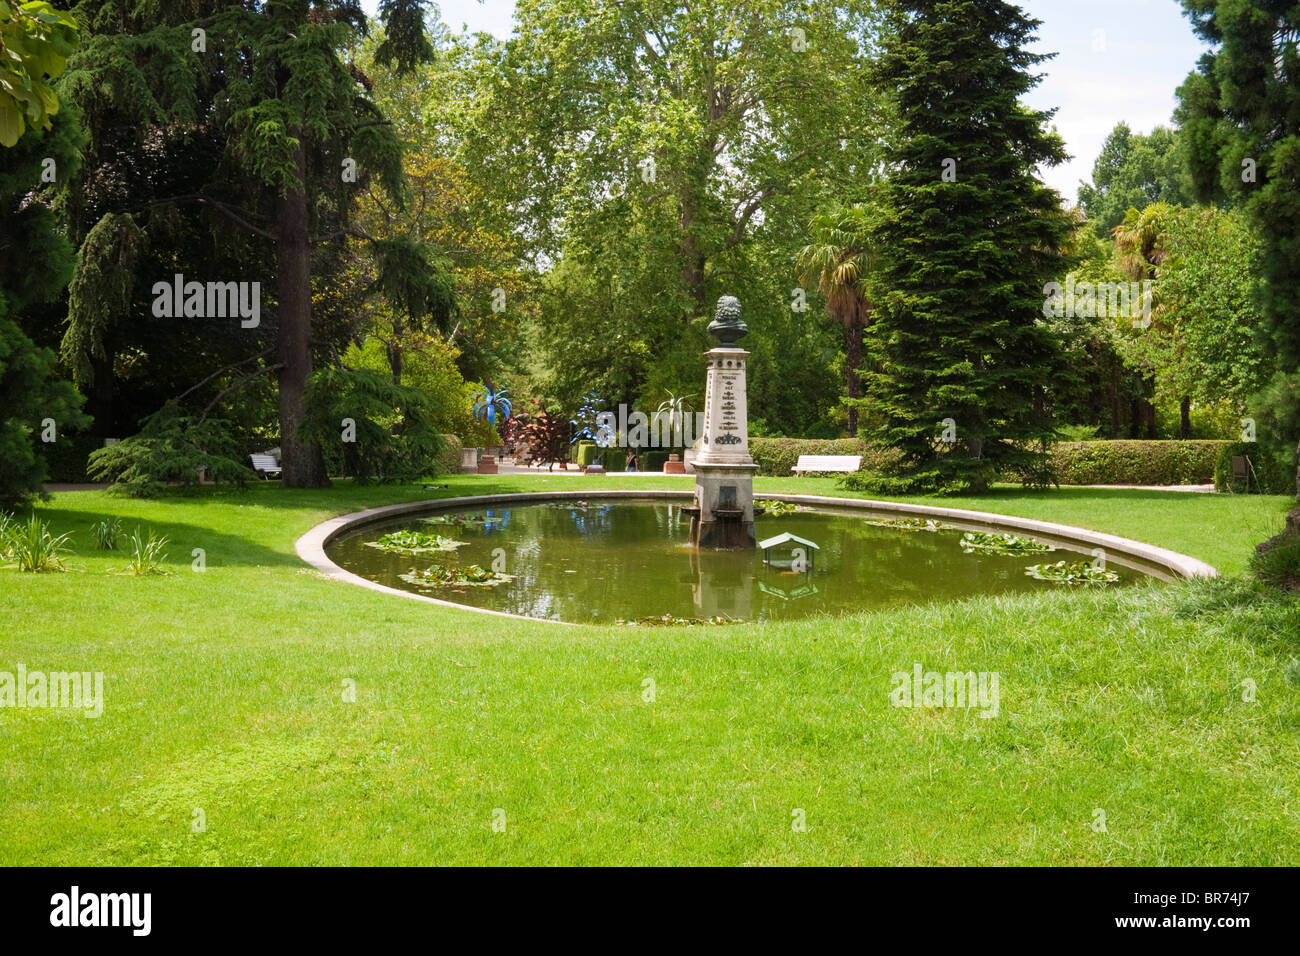 Real Jardín Botánico, the Royal Botanic Gardens, Madrid, Spain.  View of pond with bust of Linnaeus from the front of the Villanueva Pavilion Stock Photo